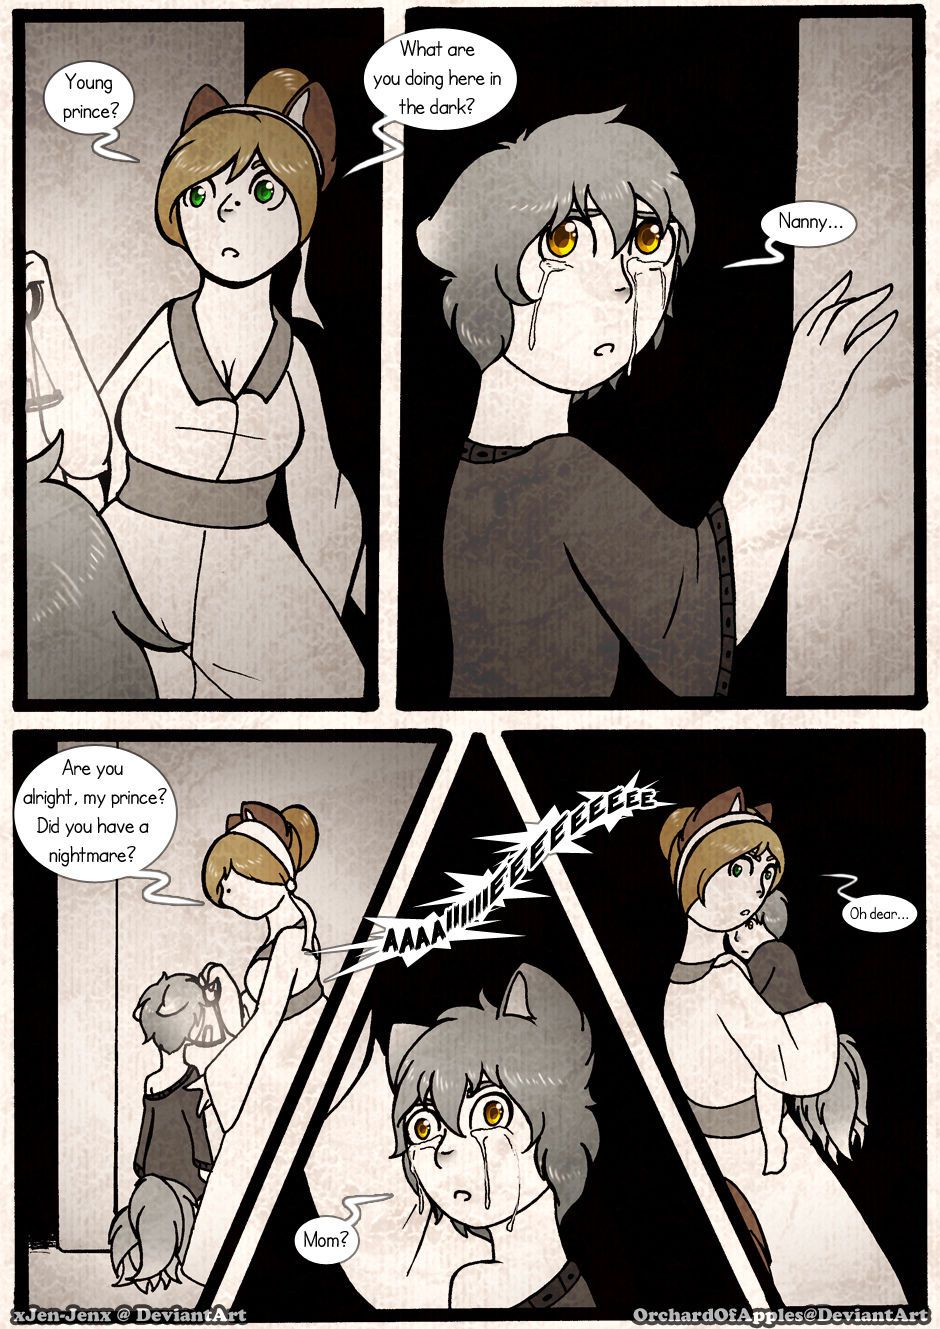 [Jeny-jen94] Between Kings and Queens [Ongoing] 145